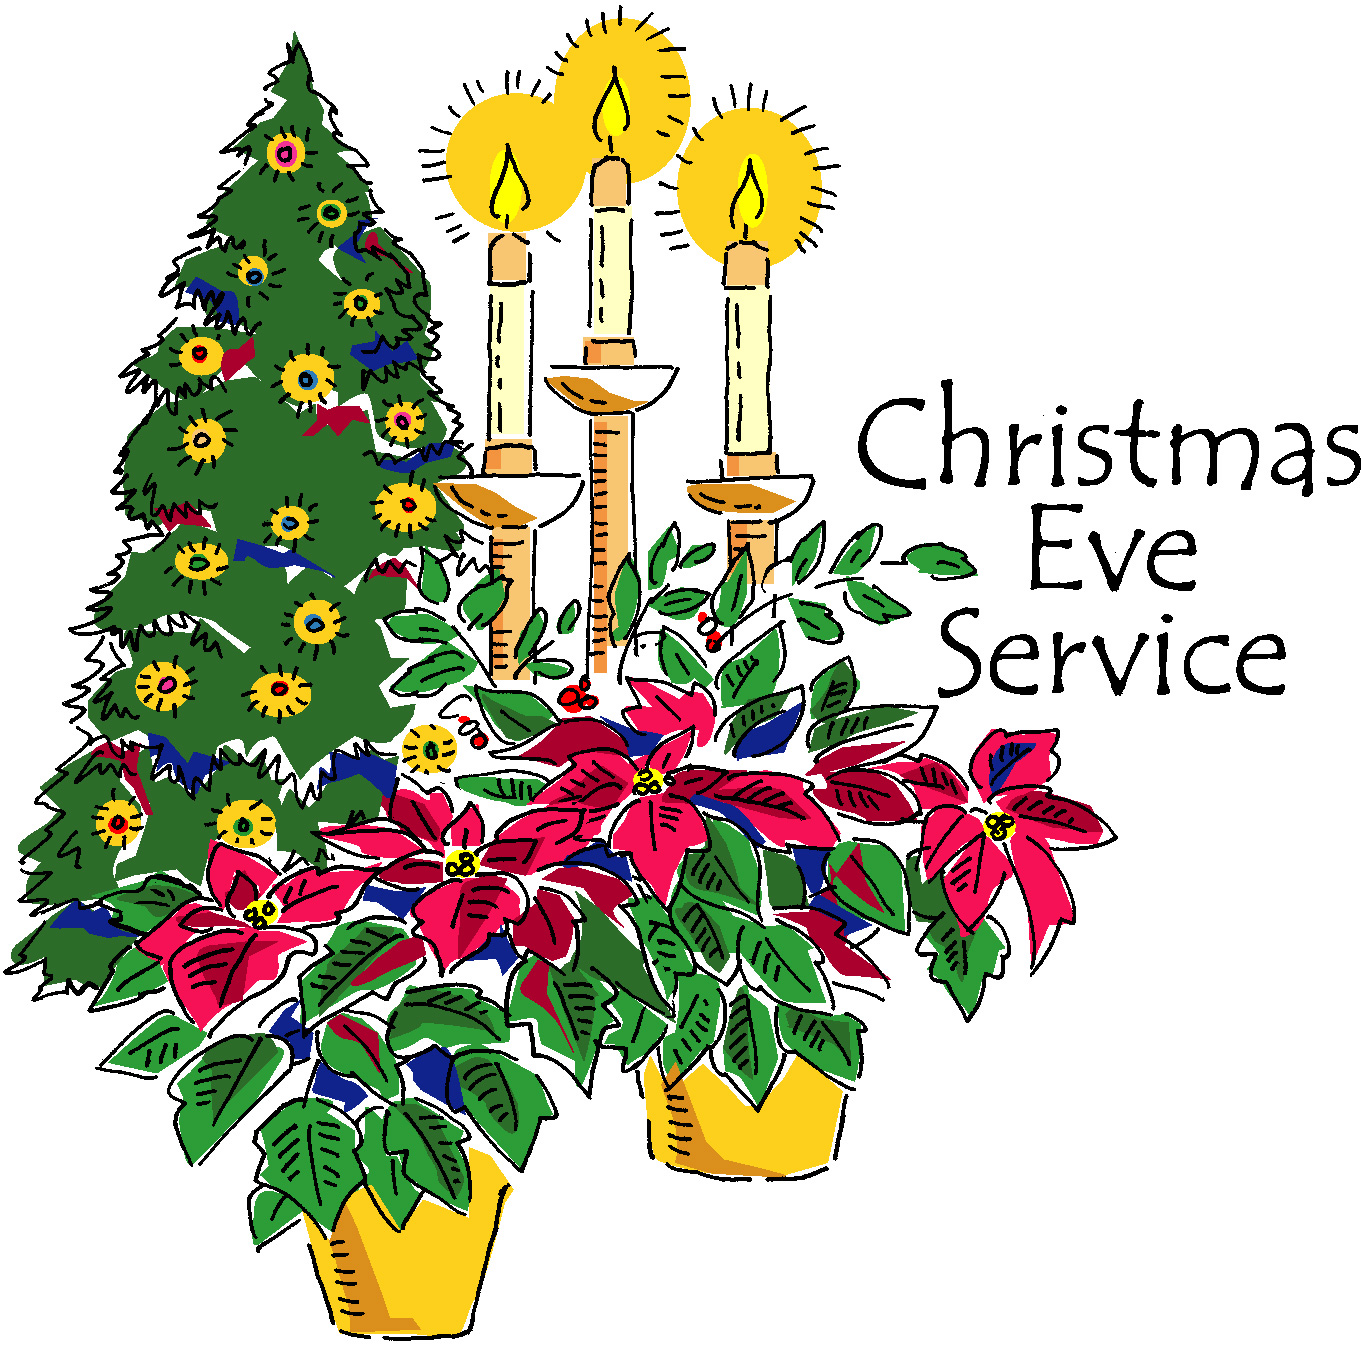 Free Christmas Church Cliparts, Download Free Clip Art, Free.